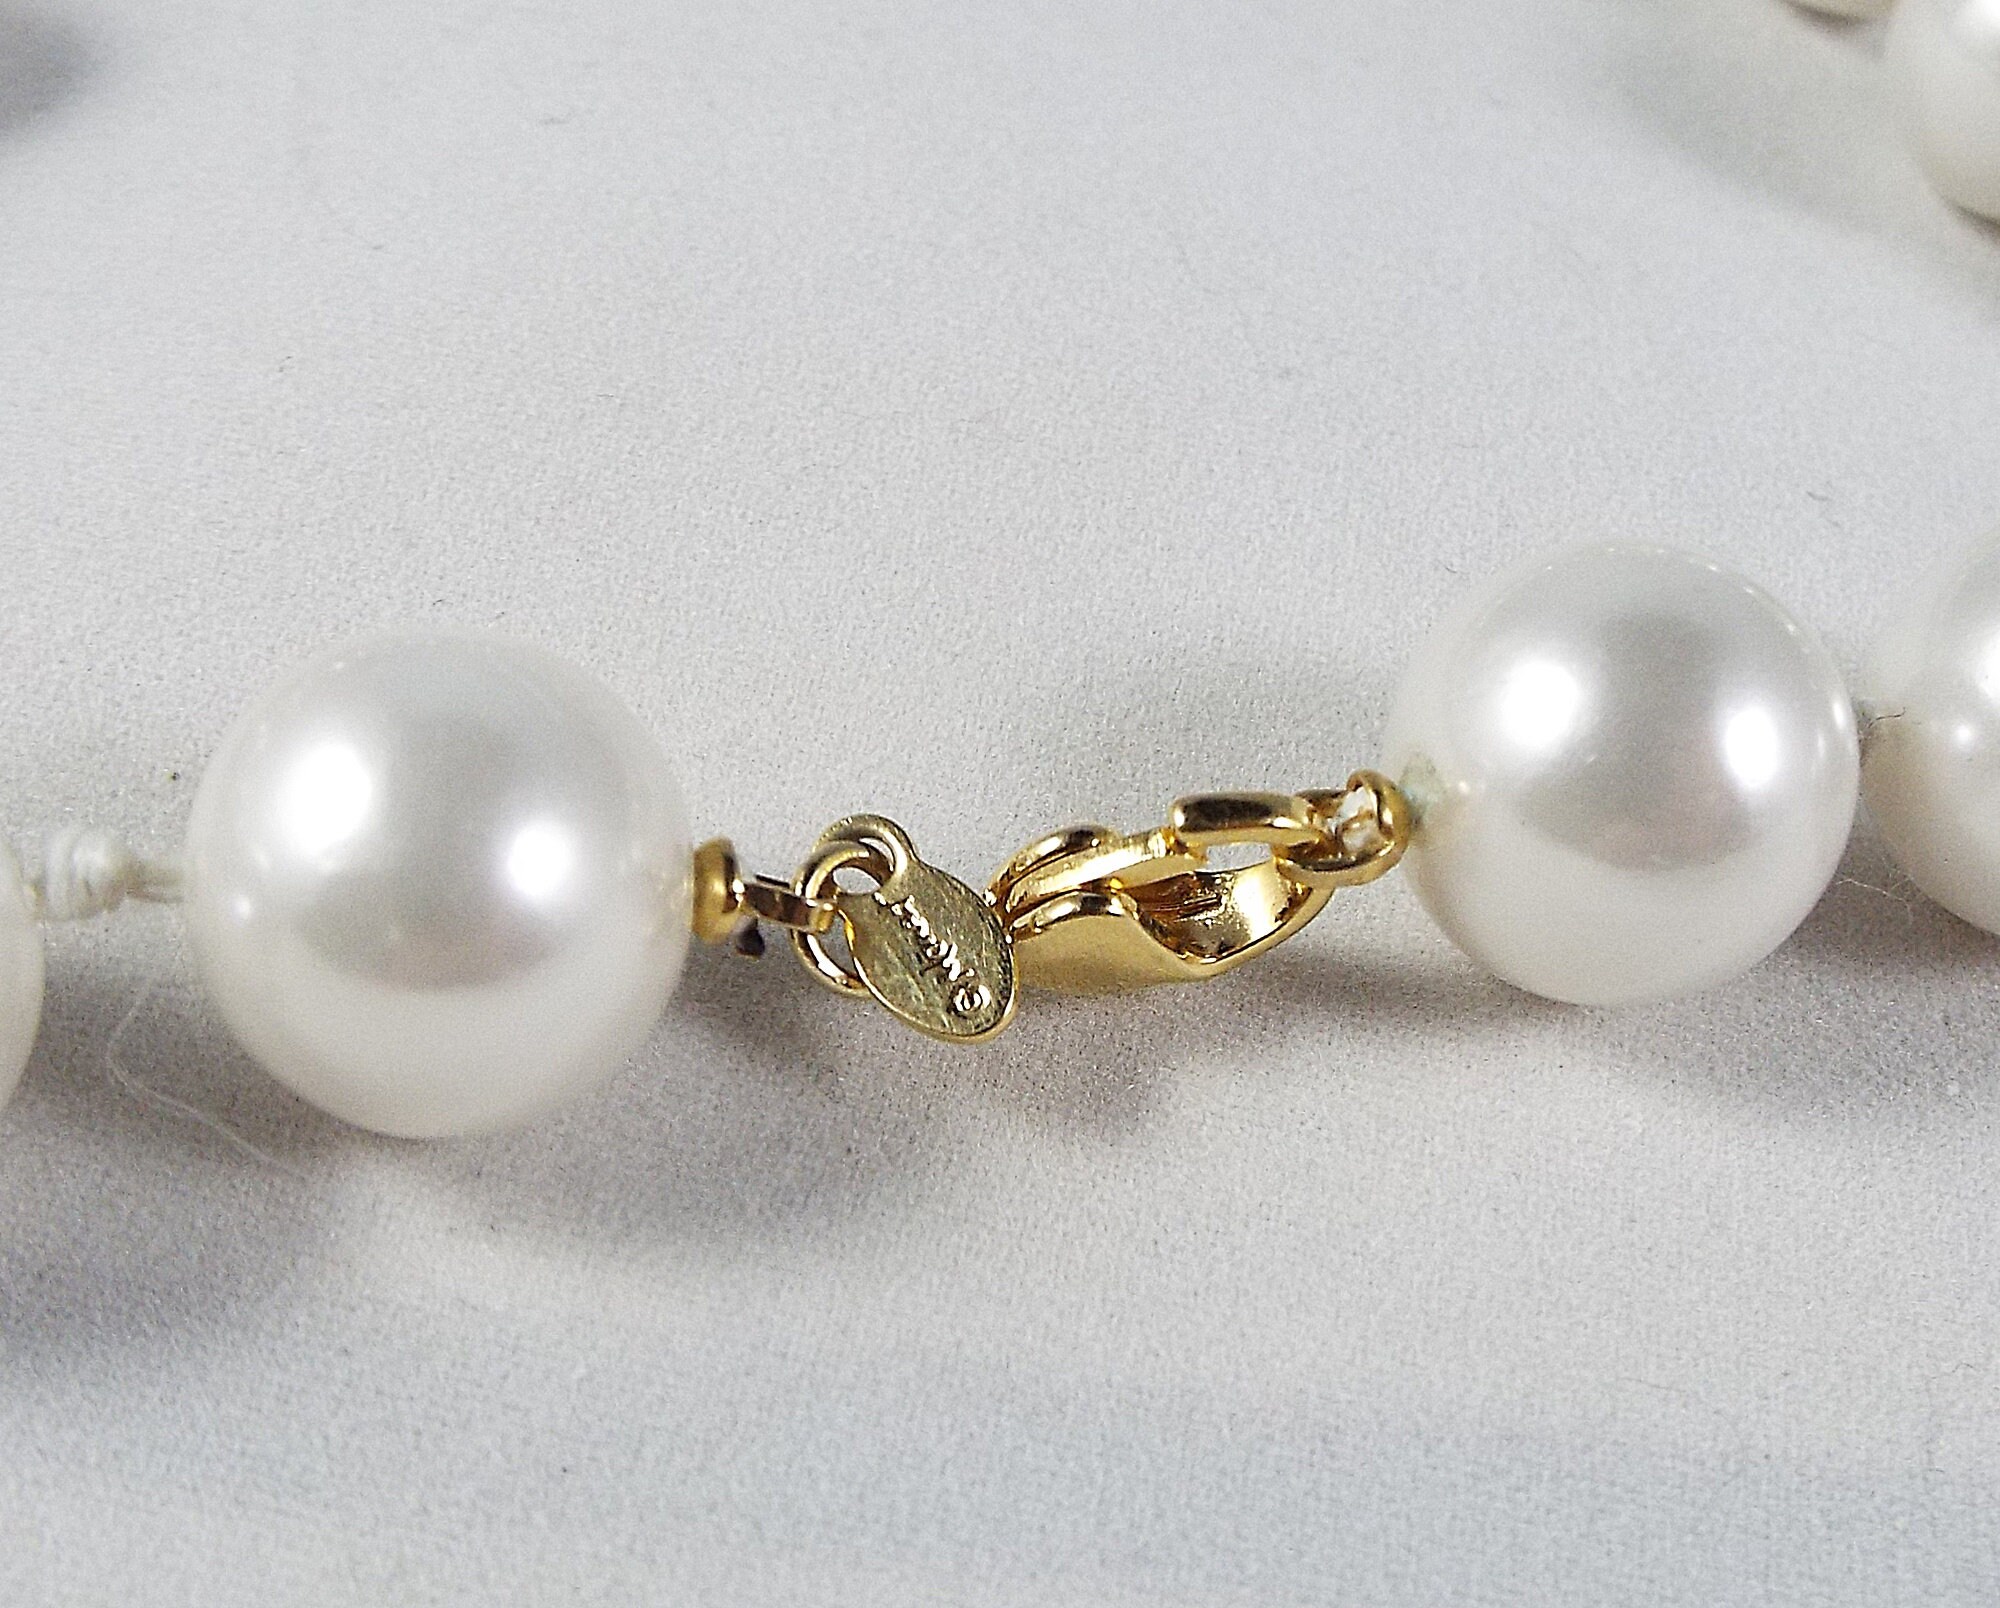 Monet Vintage 1970s Round White Faux Glass Pearl 16 Inch Knotted Long ...